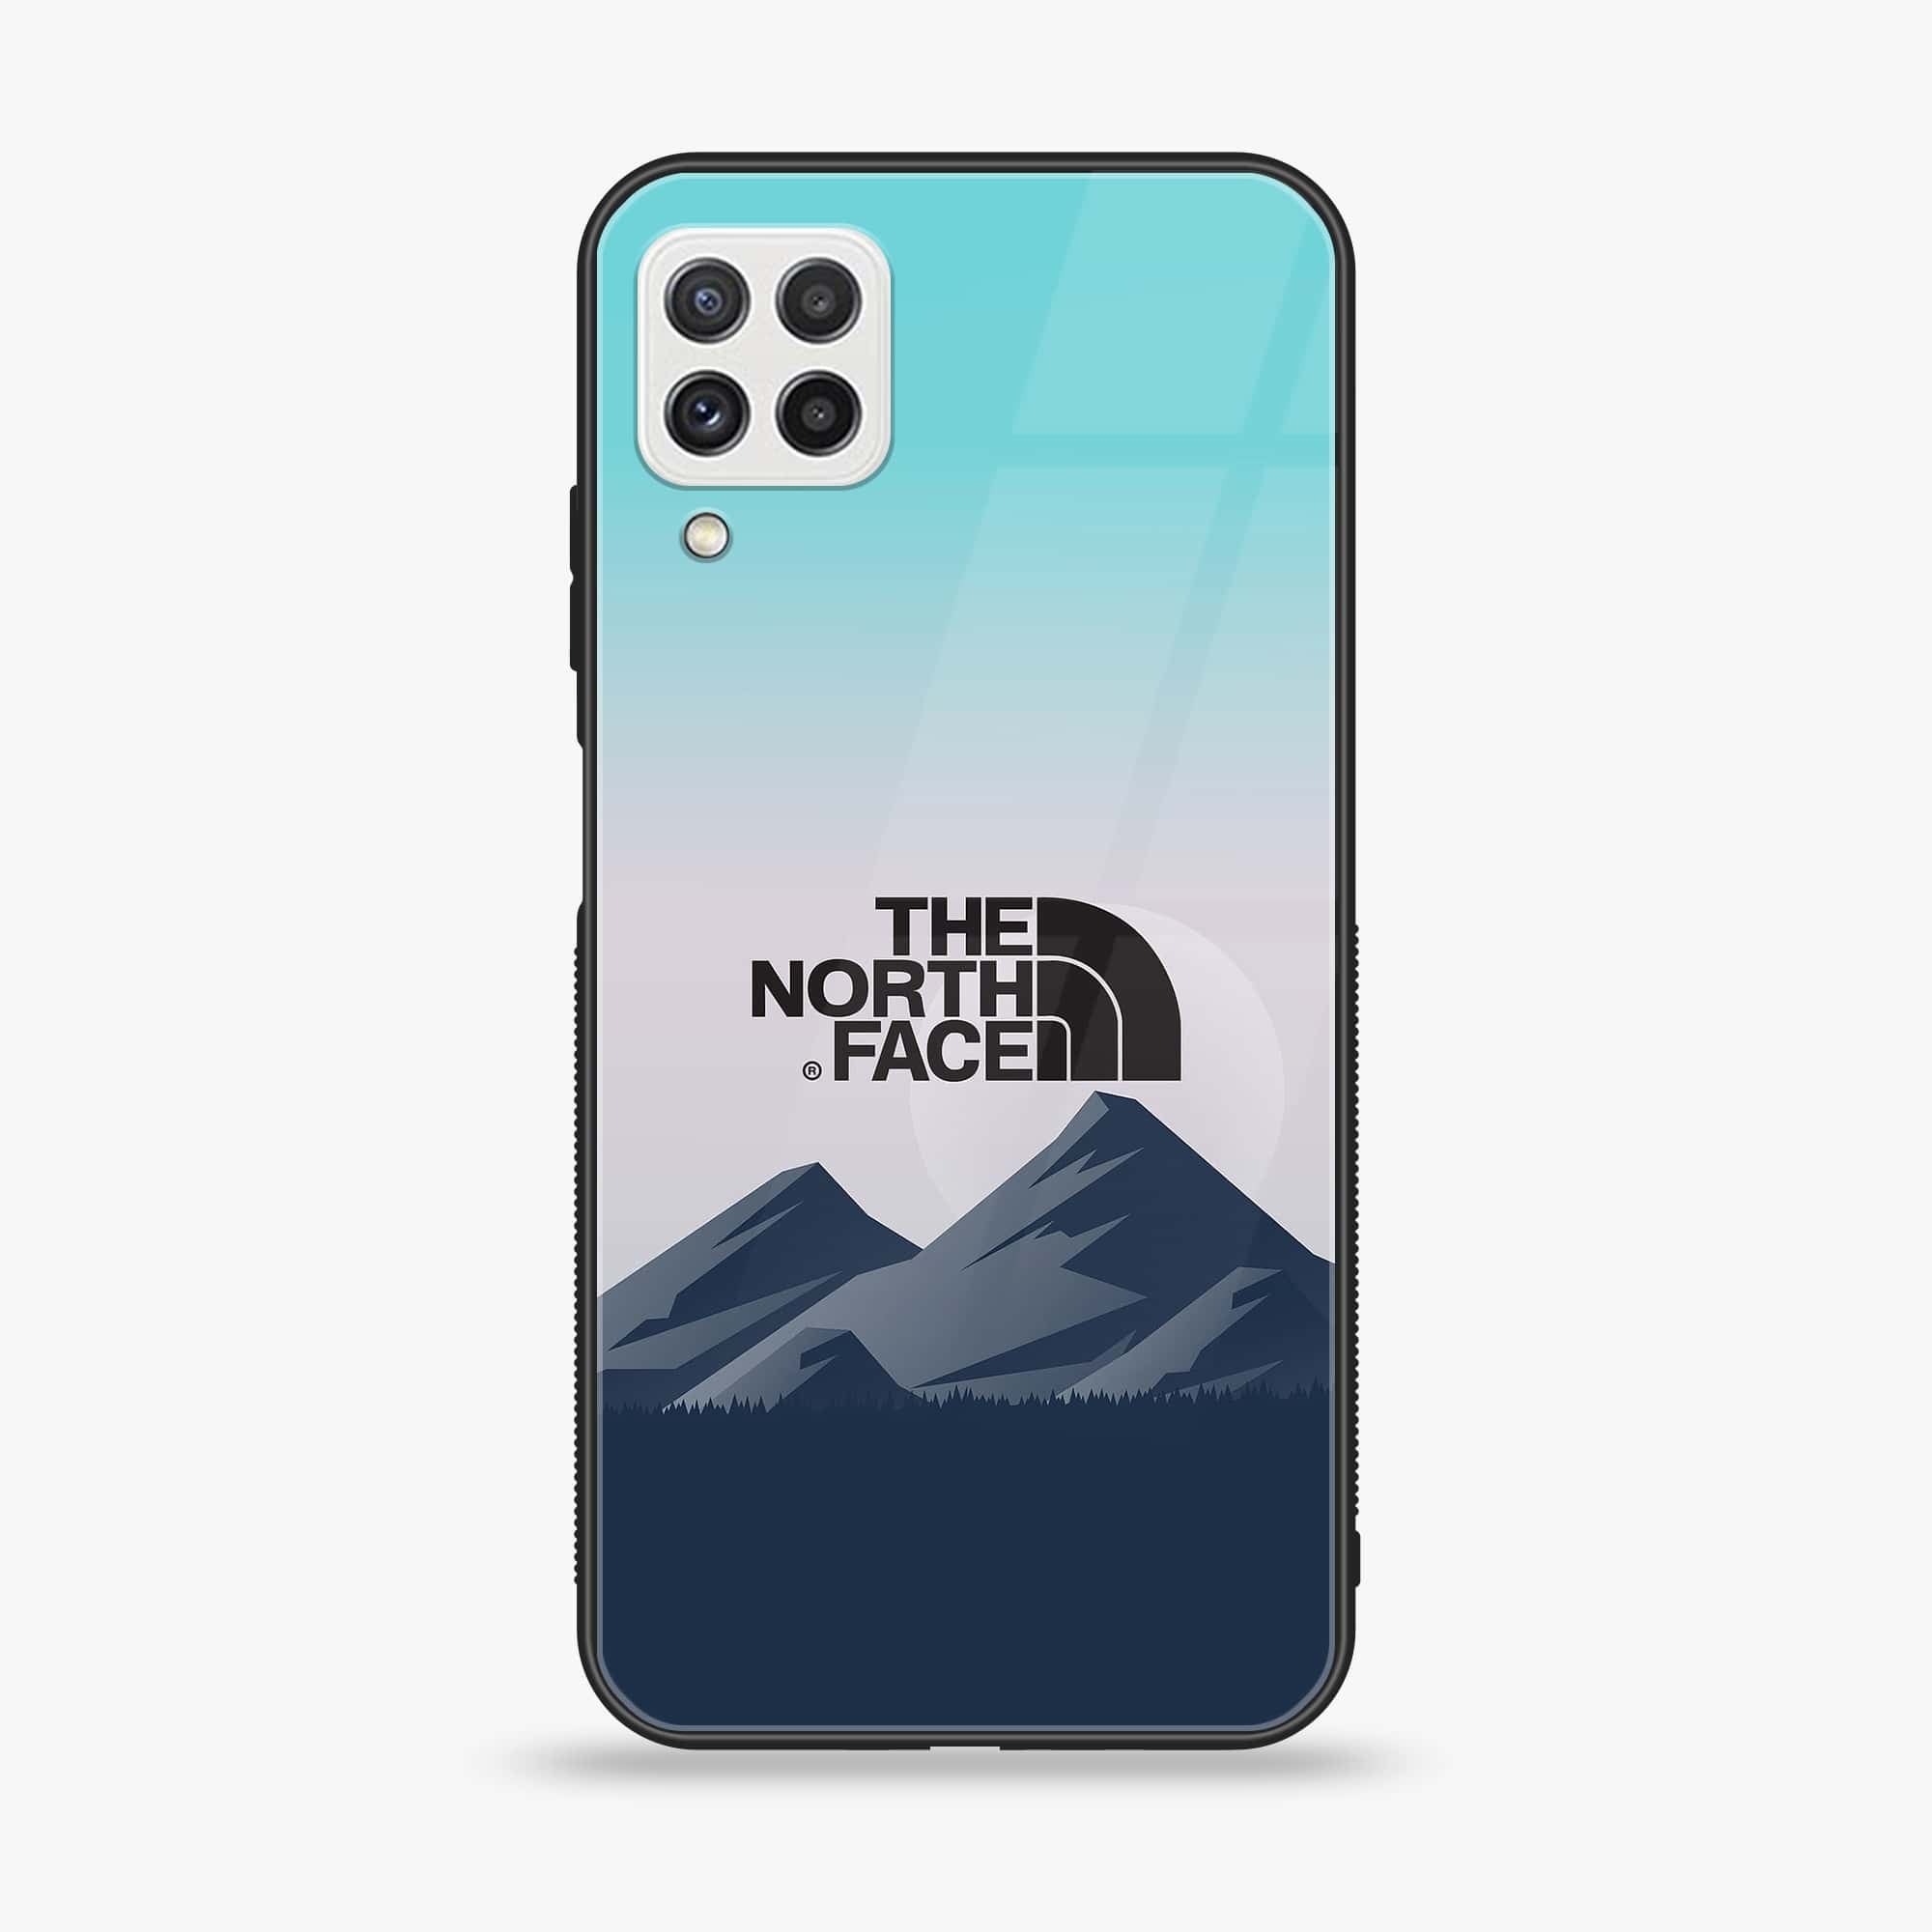 Samsung Galaxy A22 - The North Face Series - Premium Printed Glass soft Bumper shock Proof Case